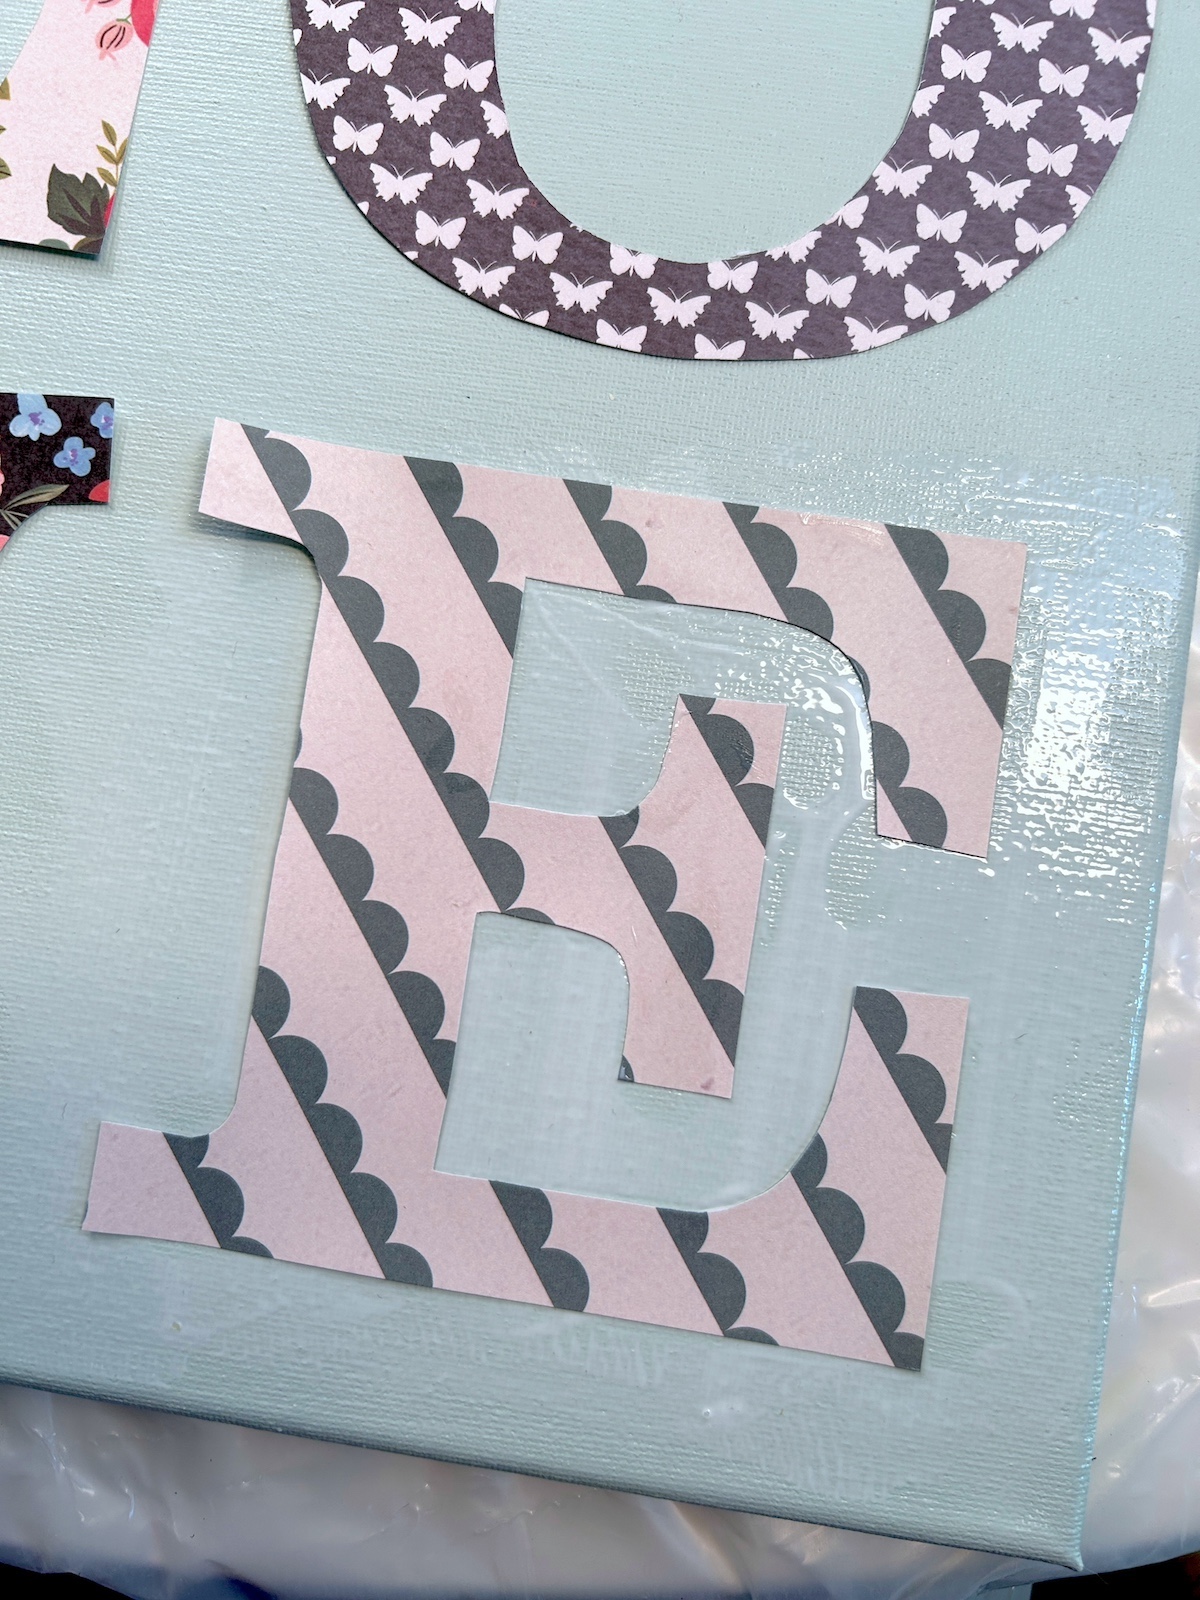 Smoothing the letter E down in wet Mod Podge